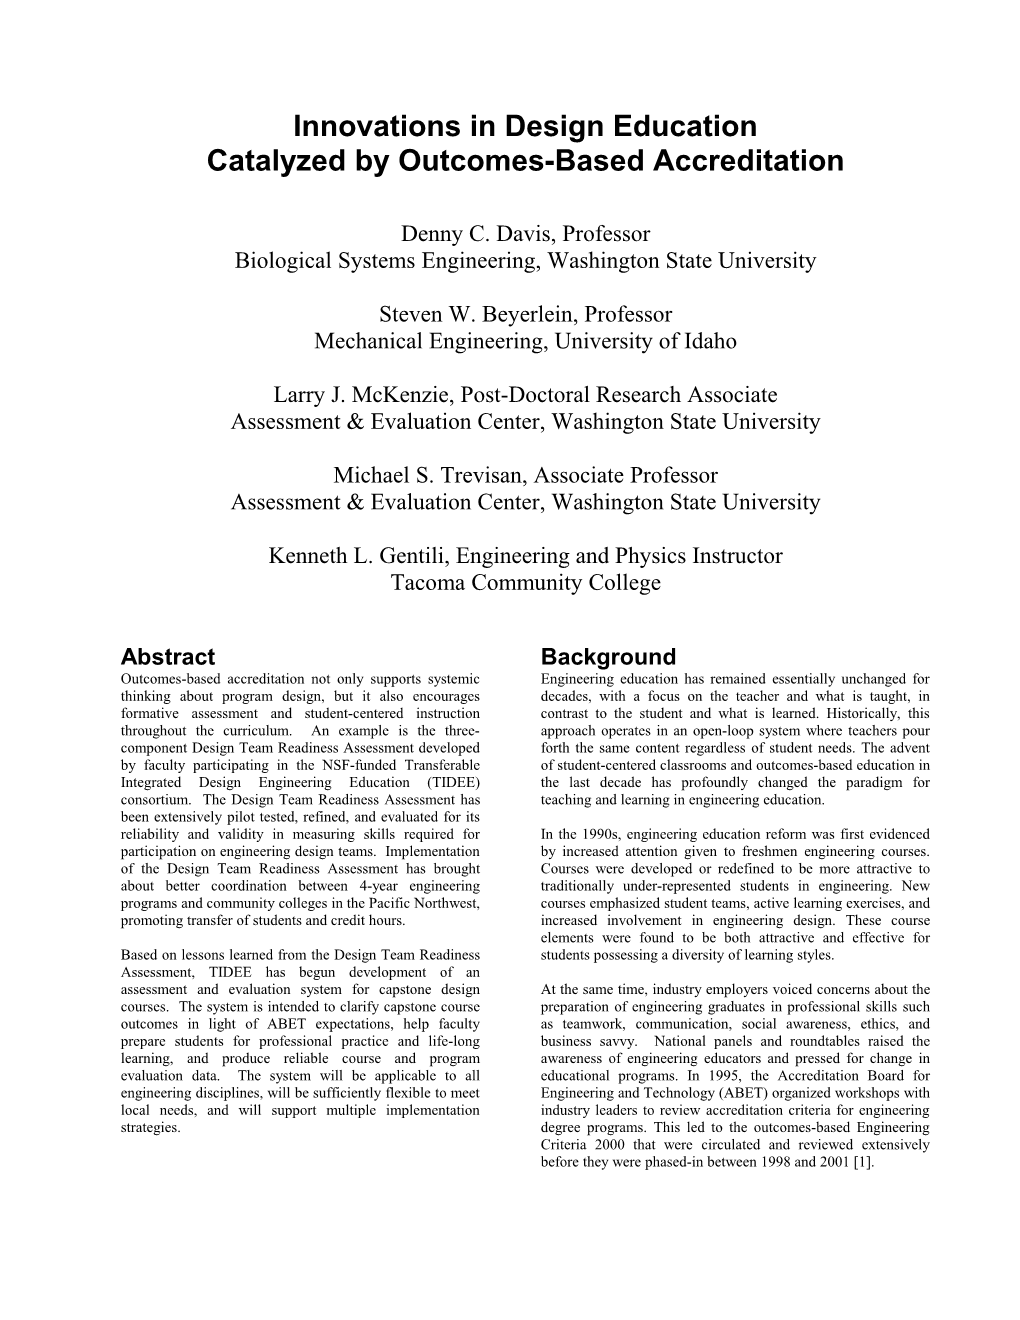 Innovative Assessment and Educational Process Catalyzed by Outcomes-Based Accreditation